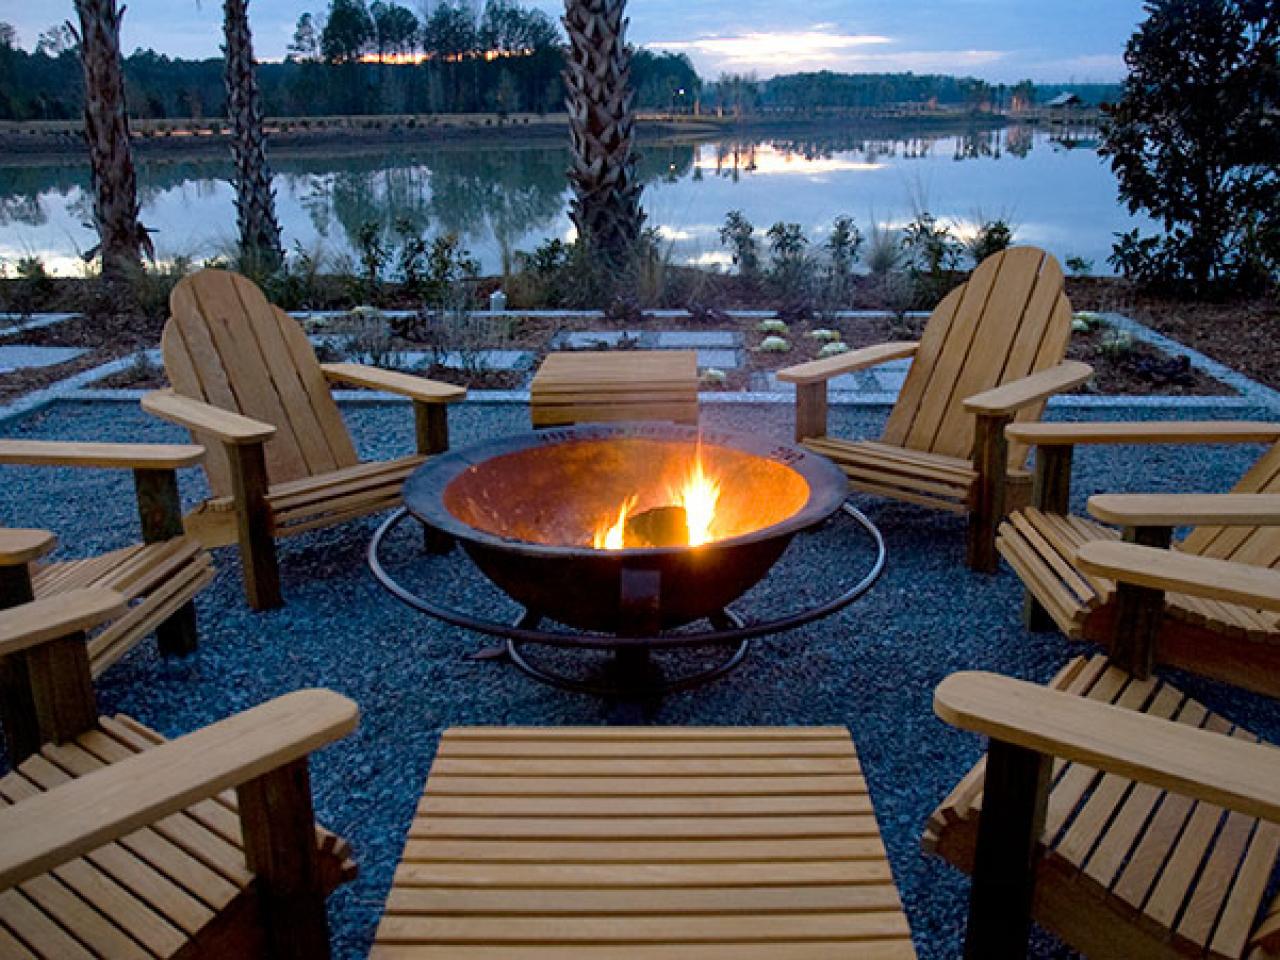 50 Best Outdoor Fire Pit Design Ideas for 2019